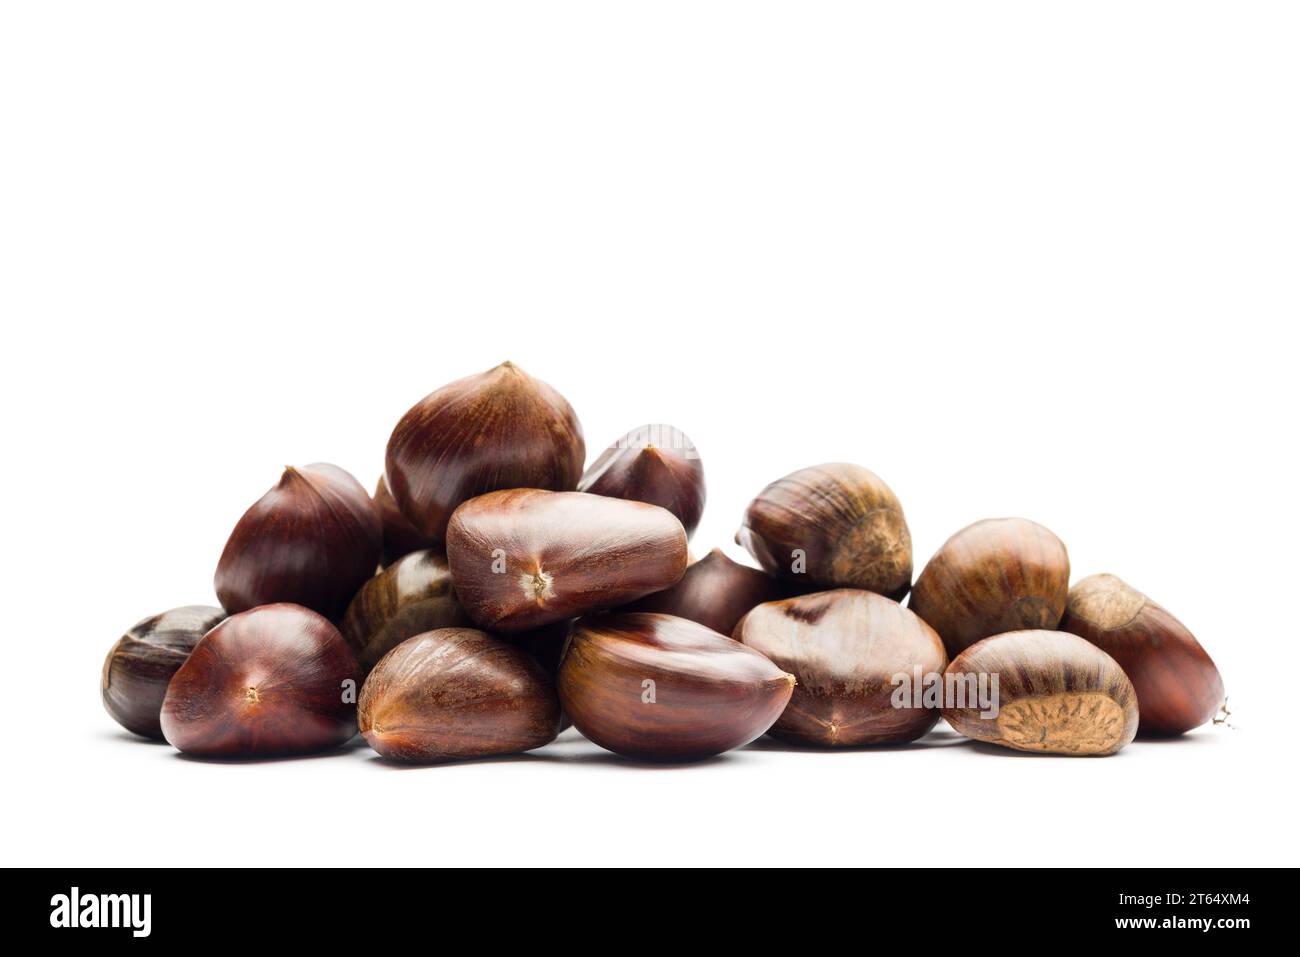 Chestnuts bunch on white background. Stock Photo